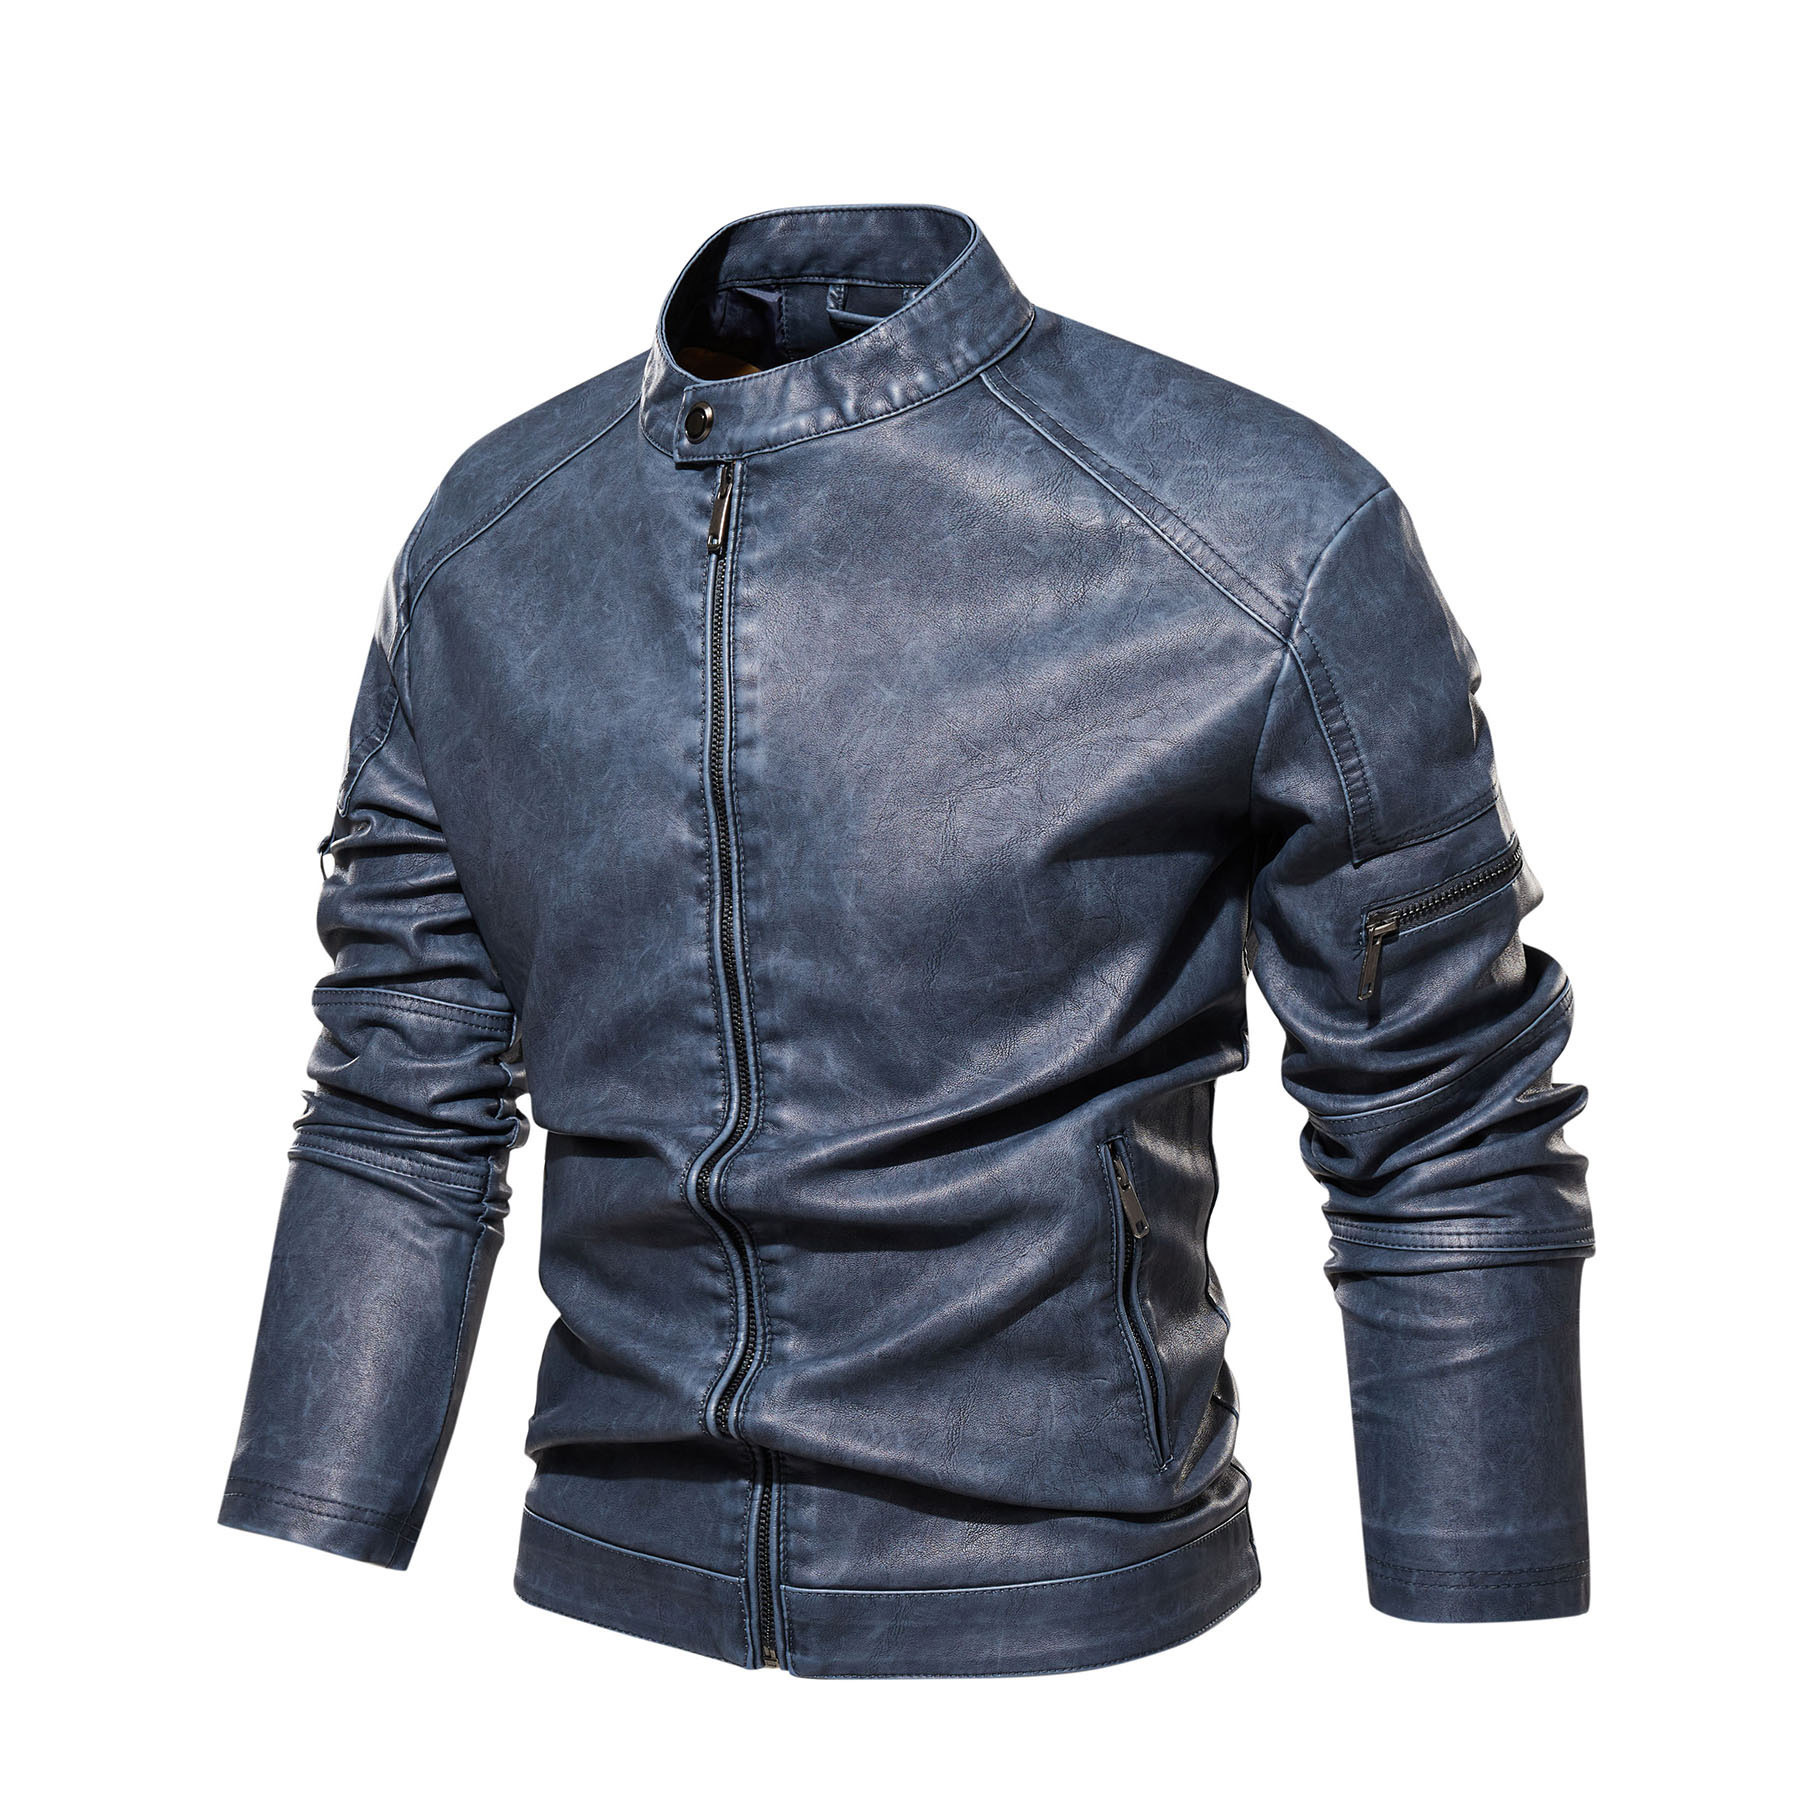 2022 New Standard Us Size Retro Washed Leather Coat Men's European and American Strong Leather Coat 1912 Cross-Border Foreign Trade Leather Coat